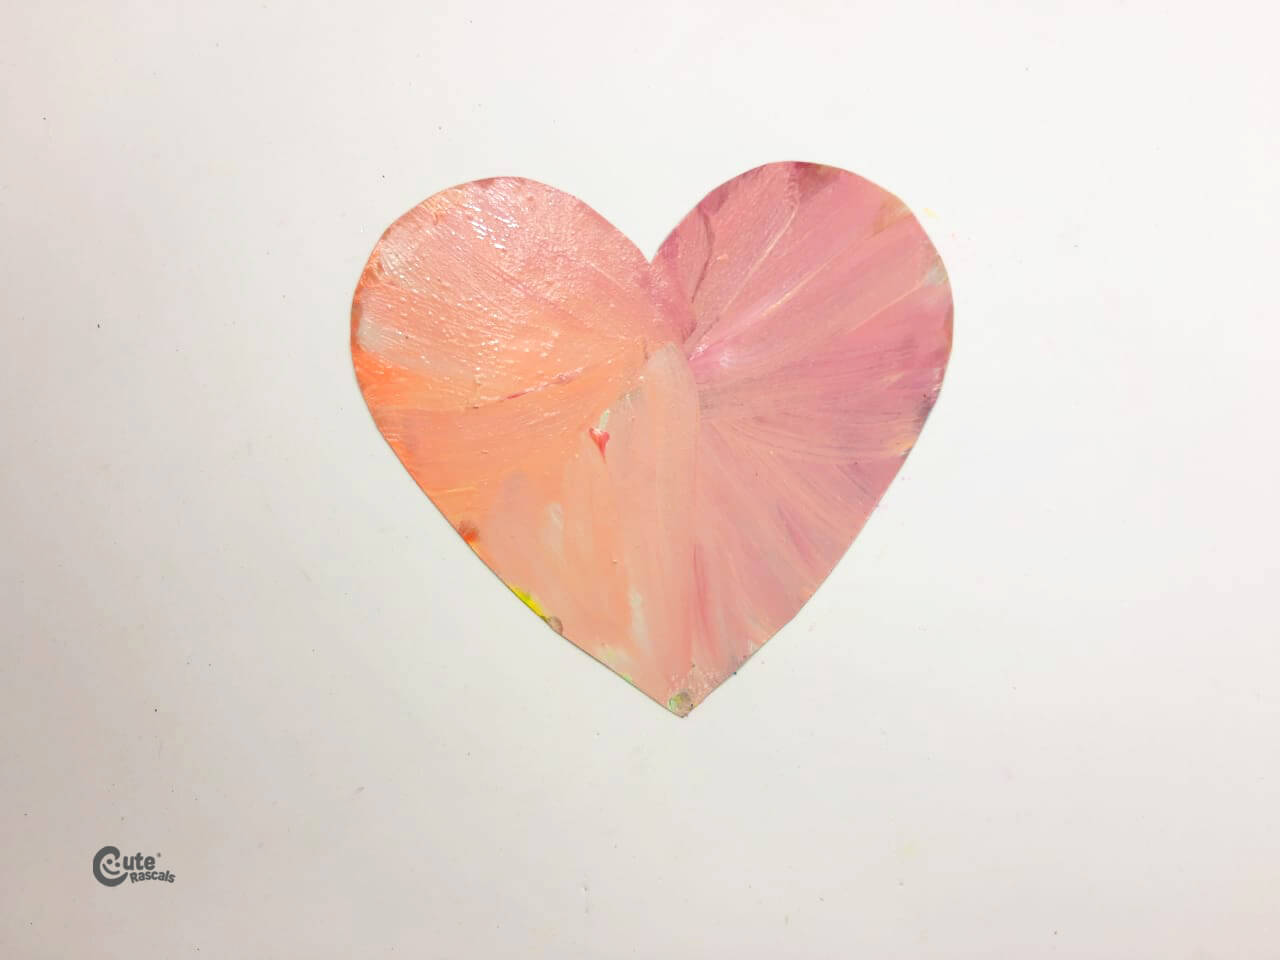 Colors on a heart shape painting. Easy art activities for preschool